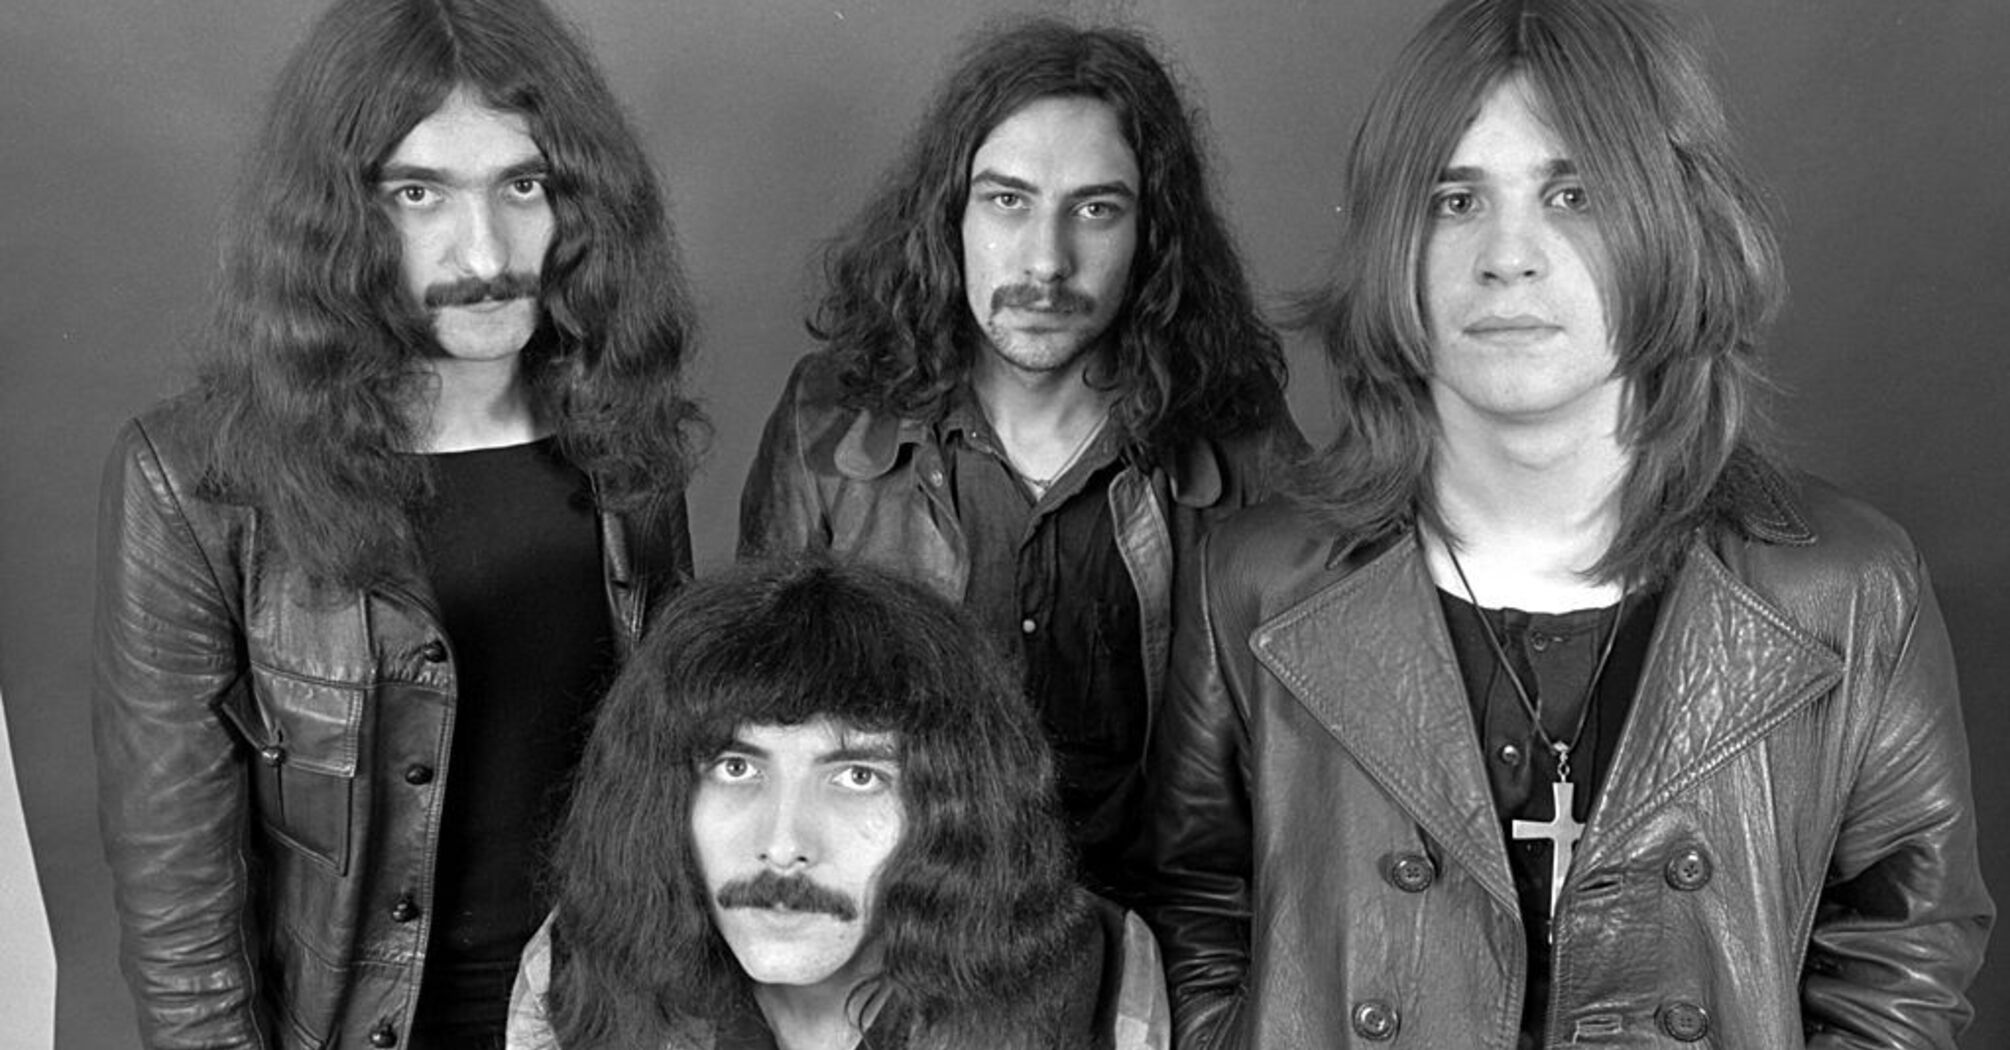 From Black Sabbath to Metallica: 15 best heavy metal tracks of all time